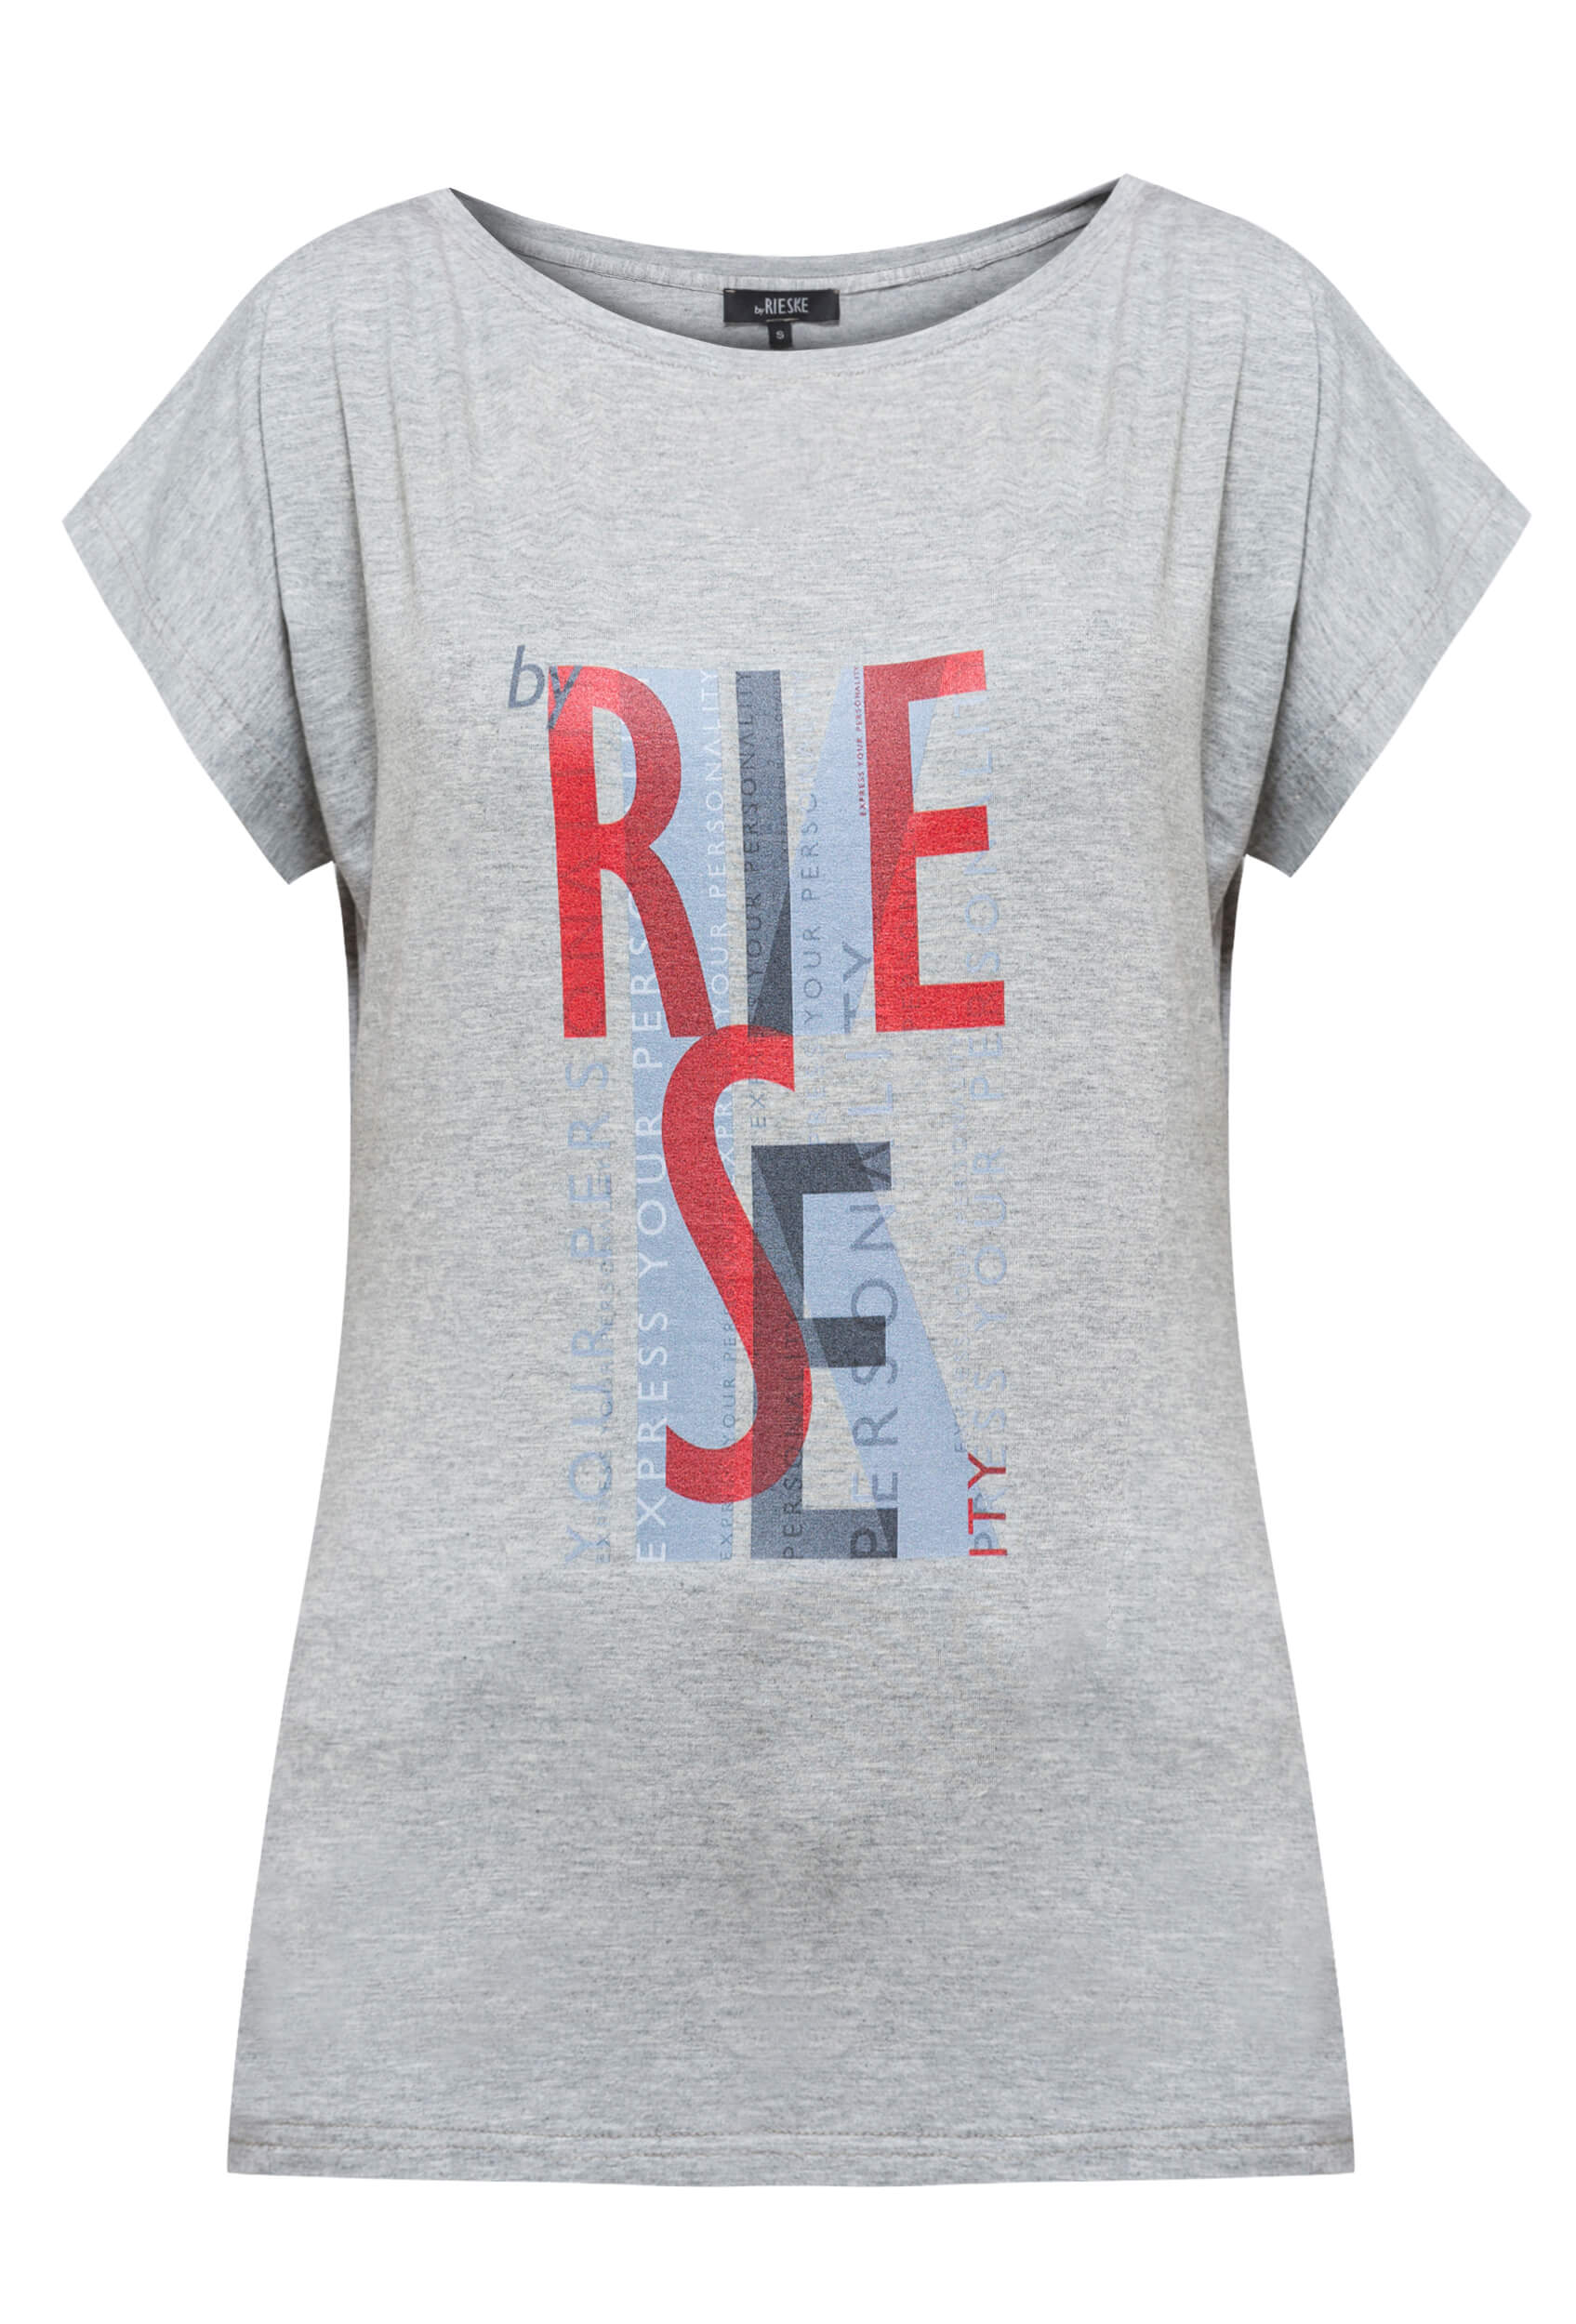 119019 FRONT PRINTED TOP GRAY - By Rieske image 2